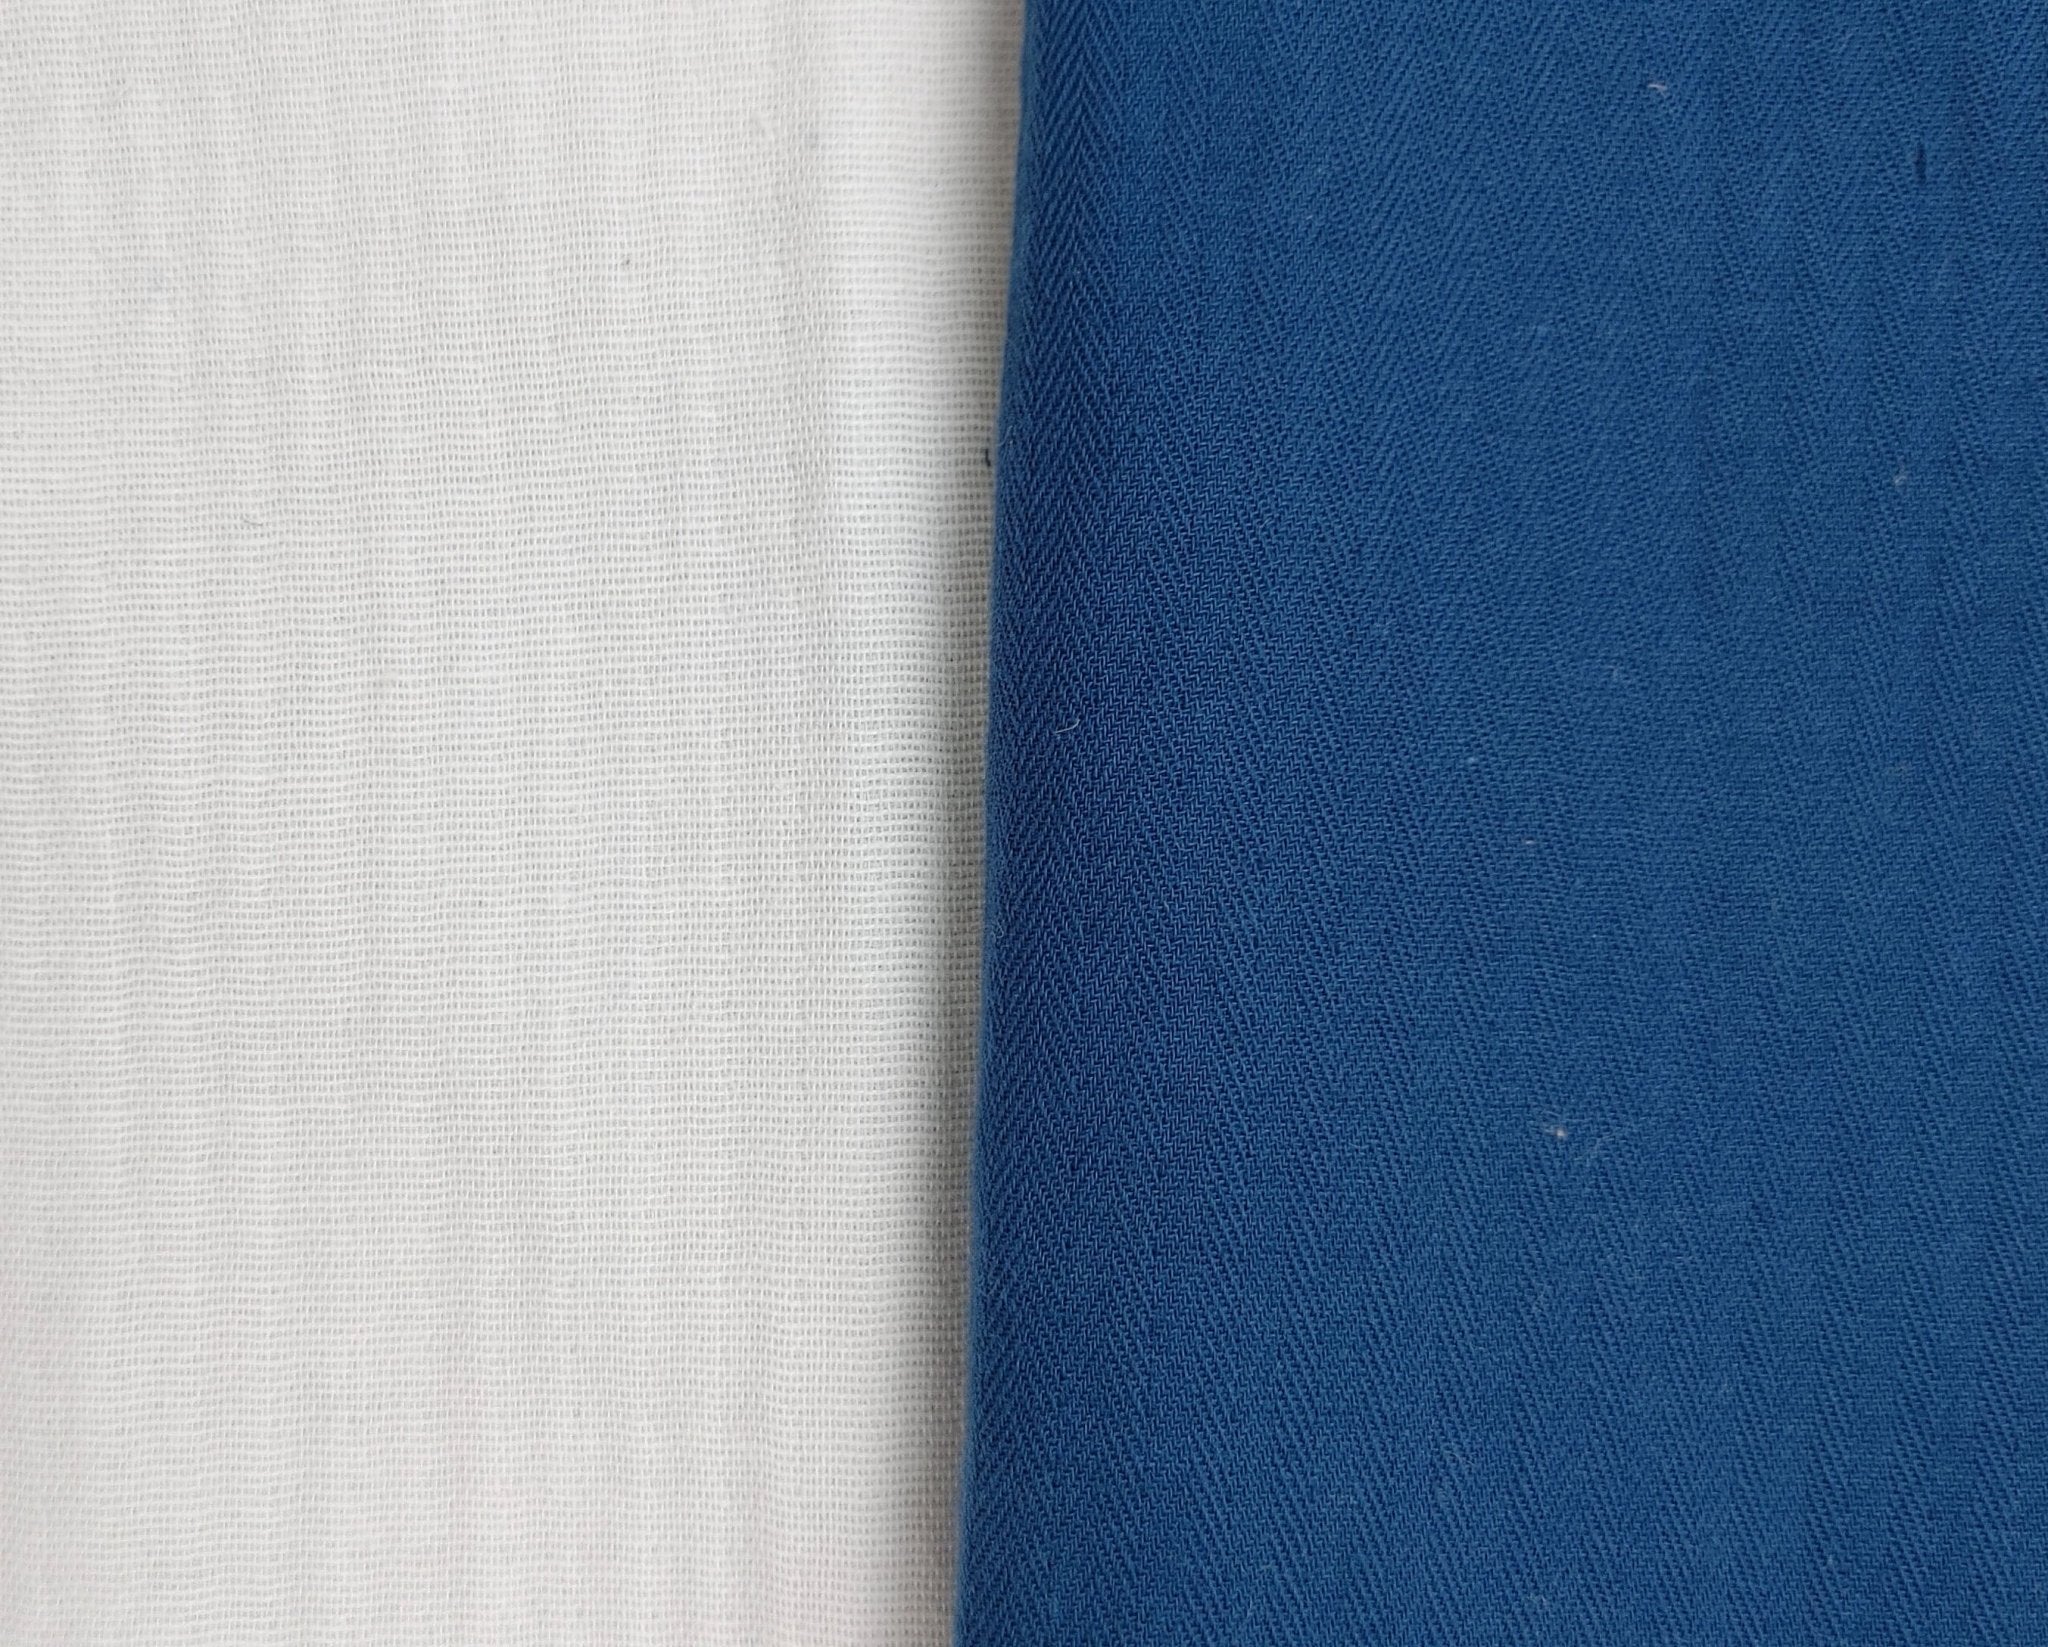 Double-Faced Herringbone Twill: 100% Cotton Fabric 7216 7215 - The Linen Lab - Blue